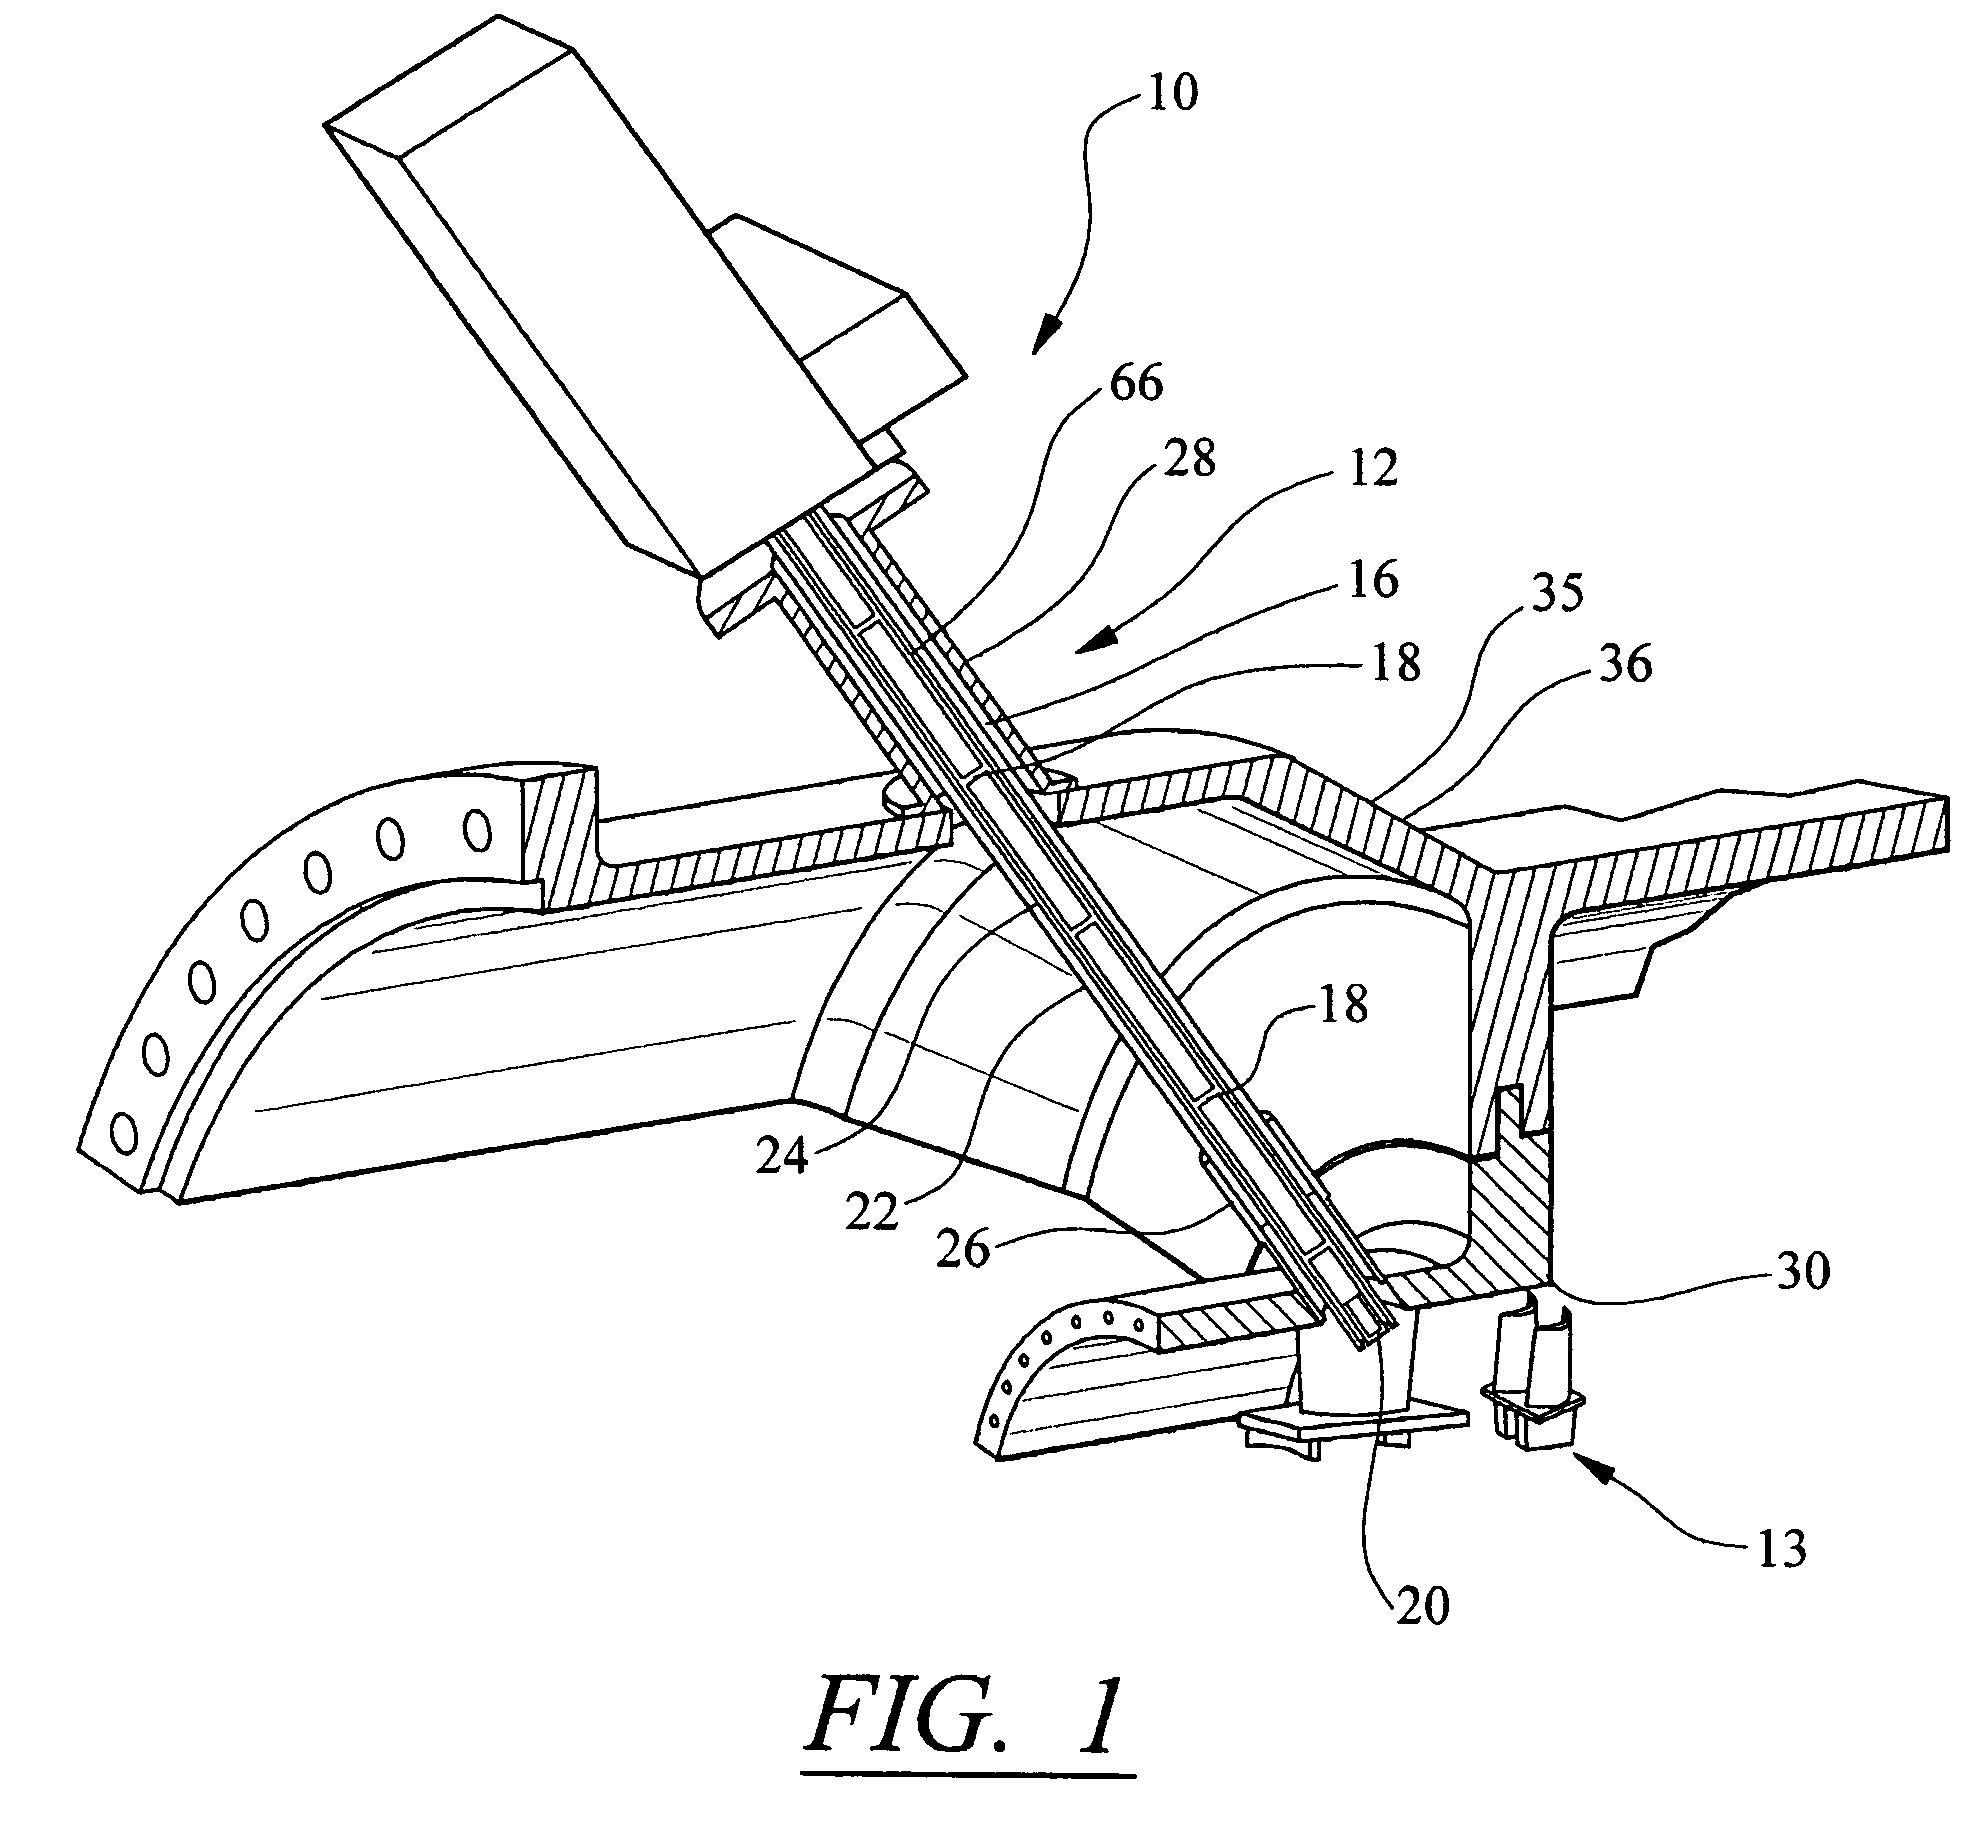 Inspection system for a turbine blade region of a turbine engine